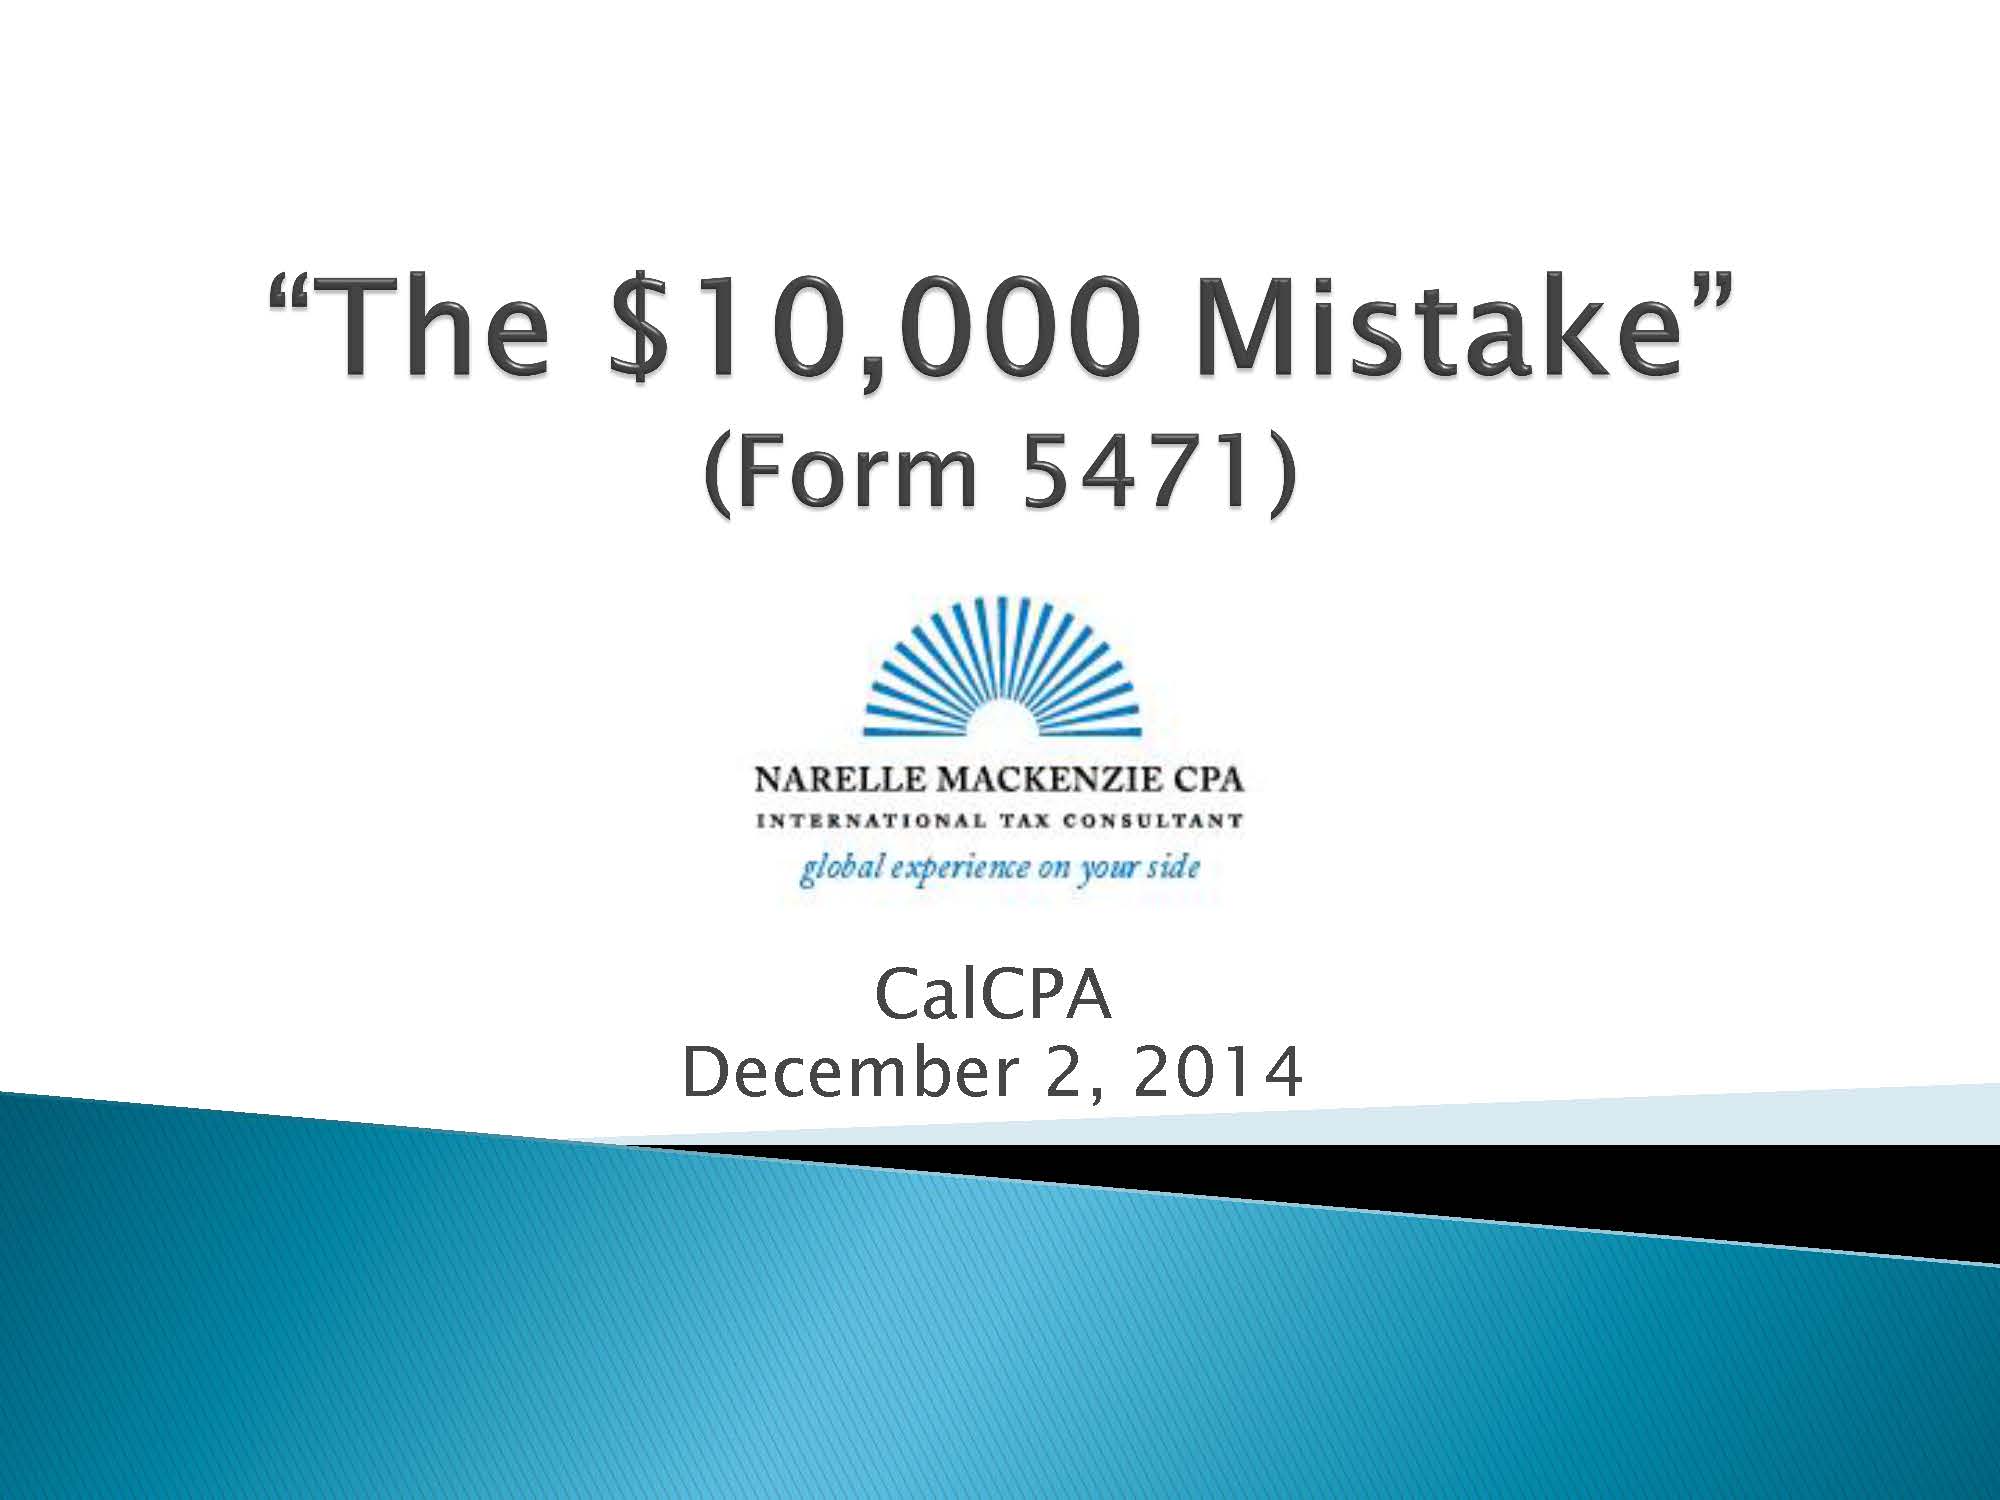 Form 5471 – The $10,000 Mistake